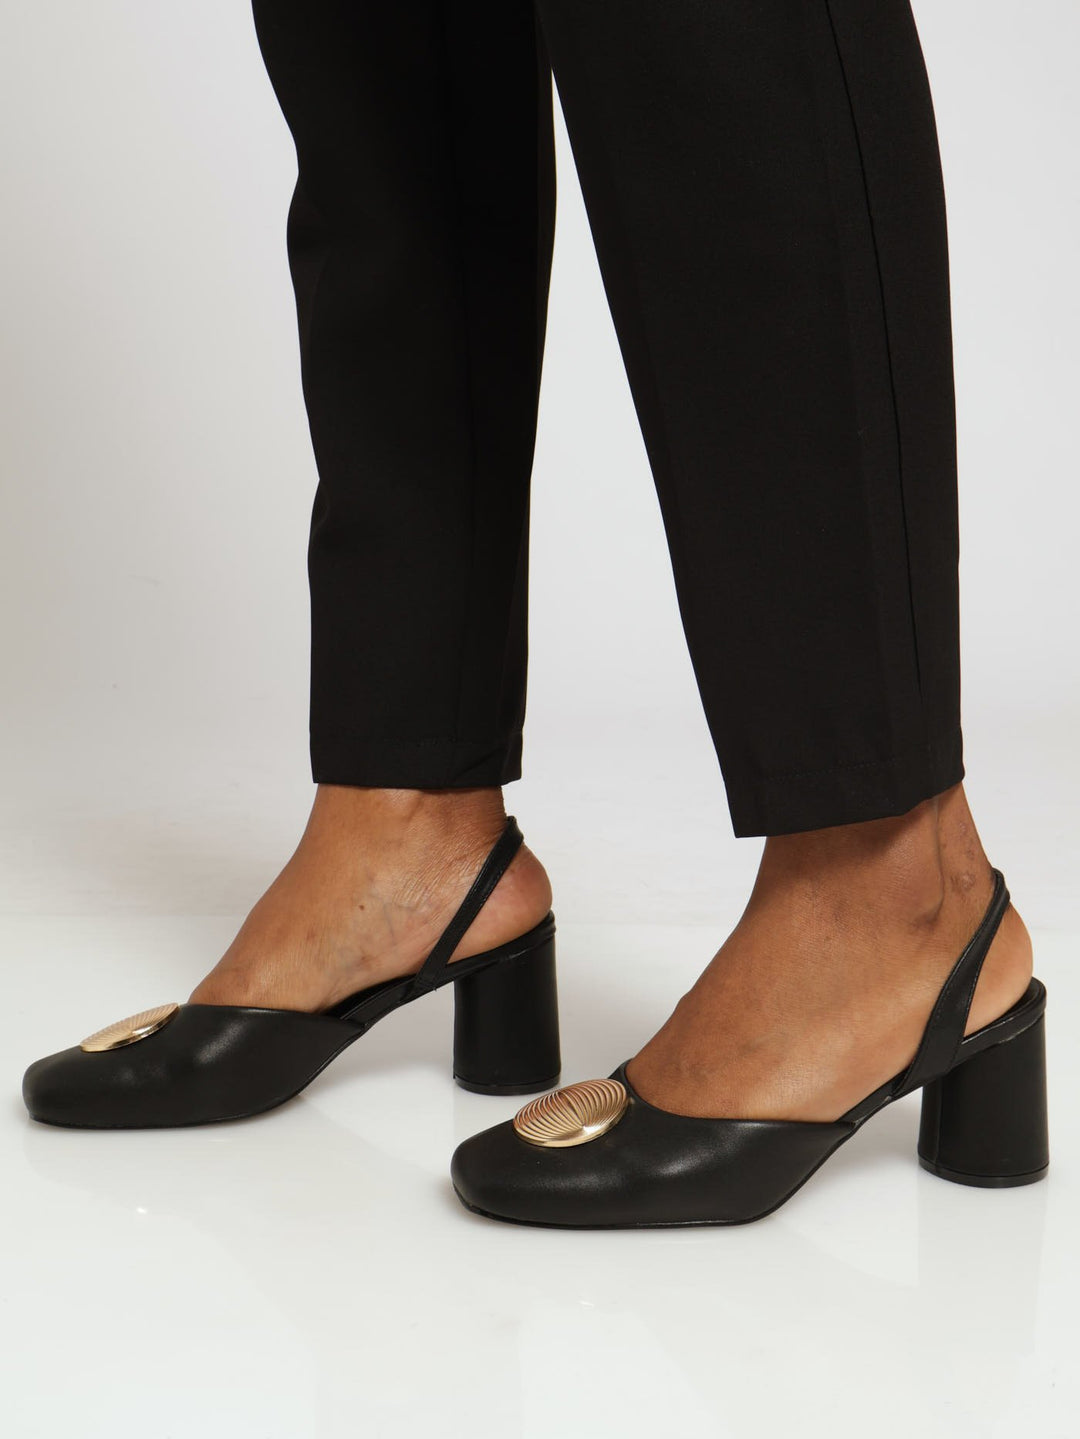 Square To Slingback Heels With Gold Trim - Black